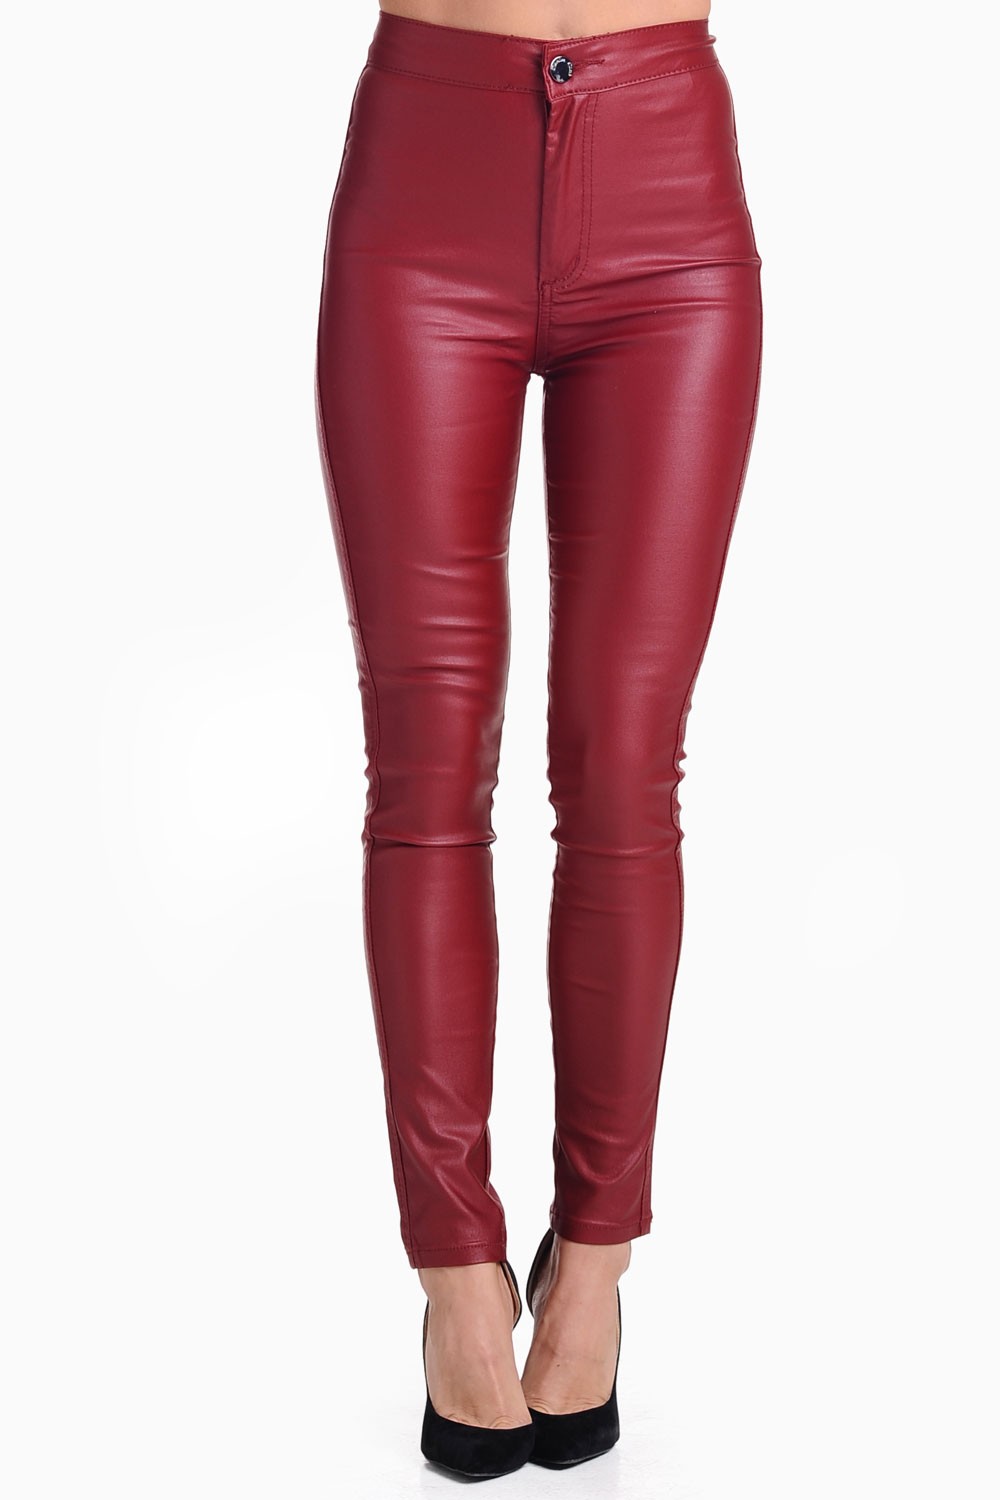 KISS Alexa High Waisted Leather Look Trousers in Burgundy | iCLOTHING